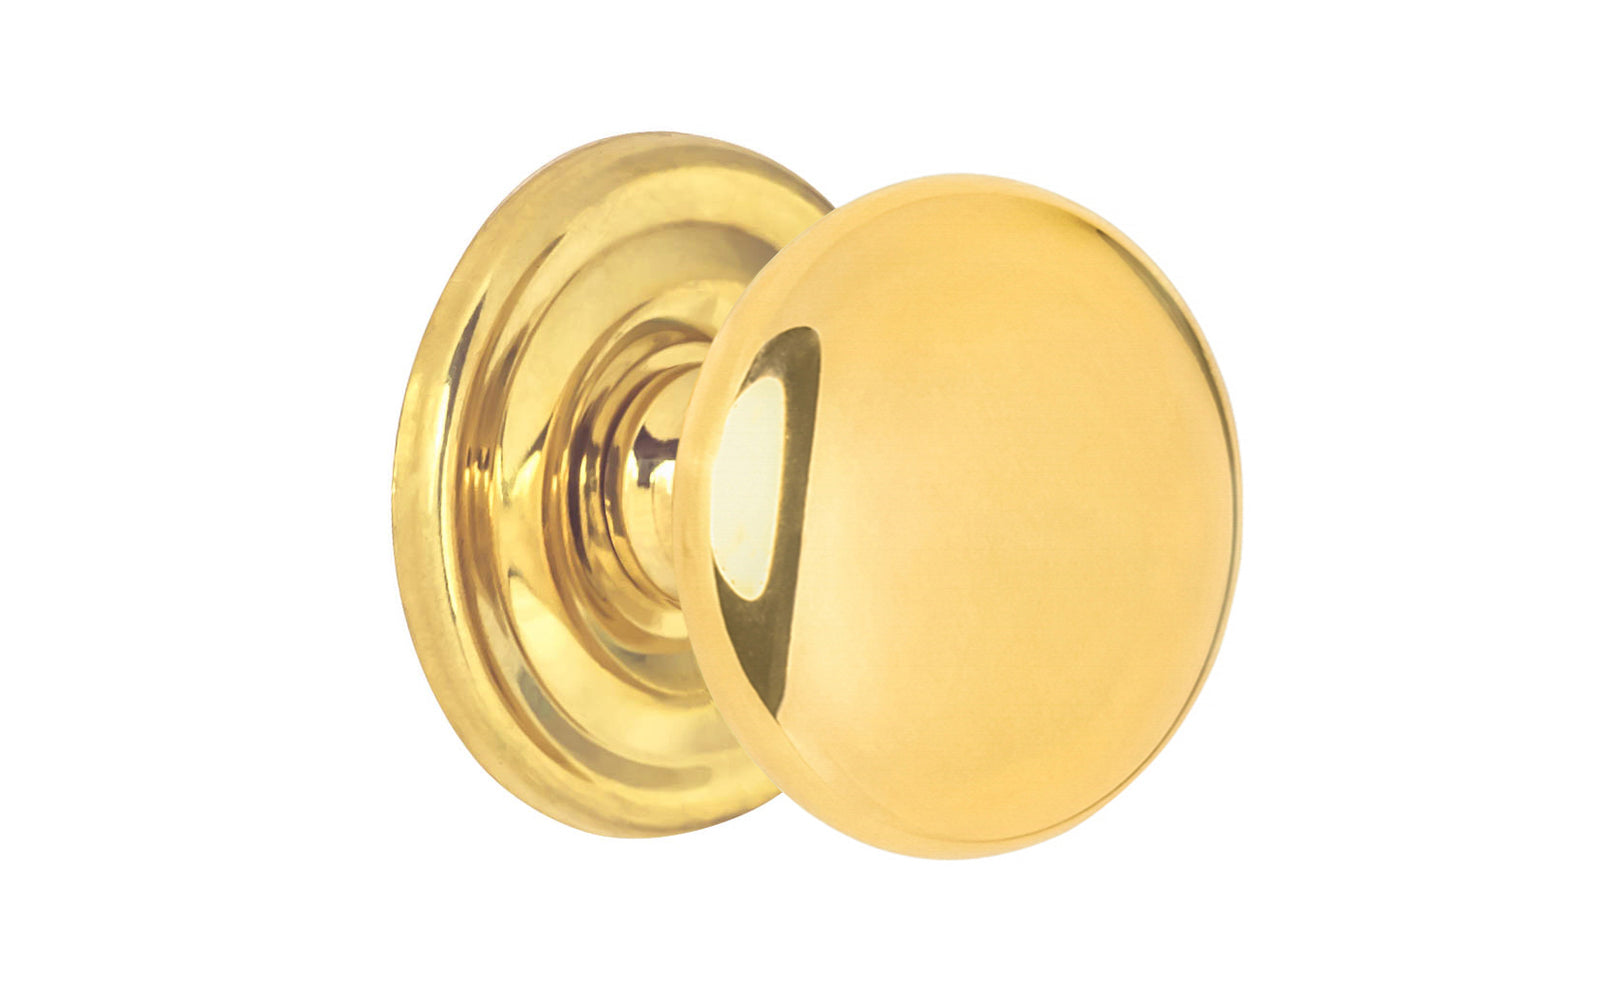 Vintage-style Hardware · Classic & traditional solid core unlacquered solid brass cabinet knob. 1-1/4